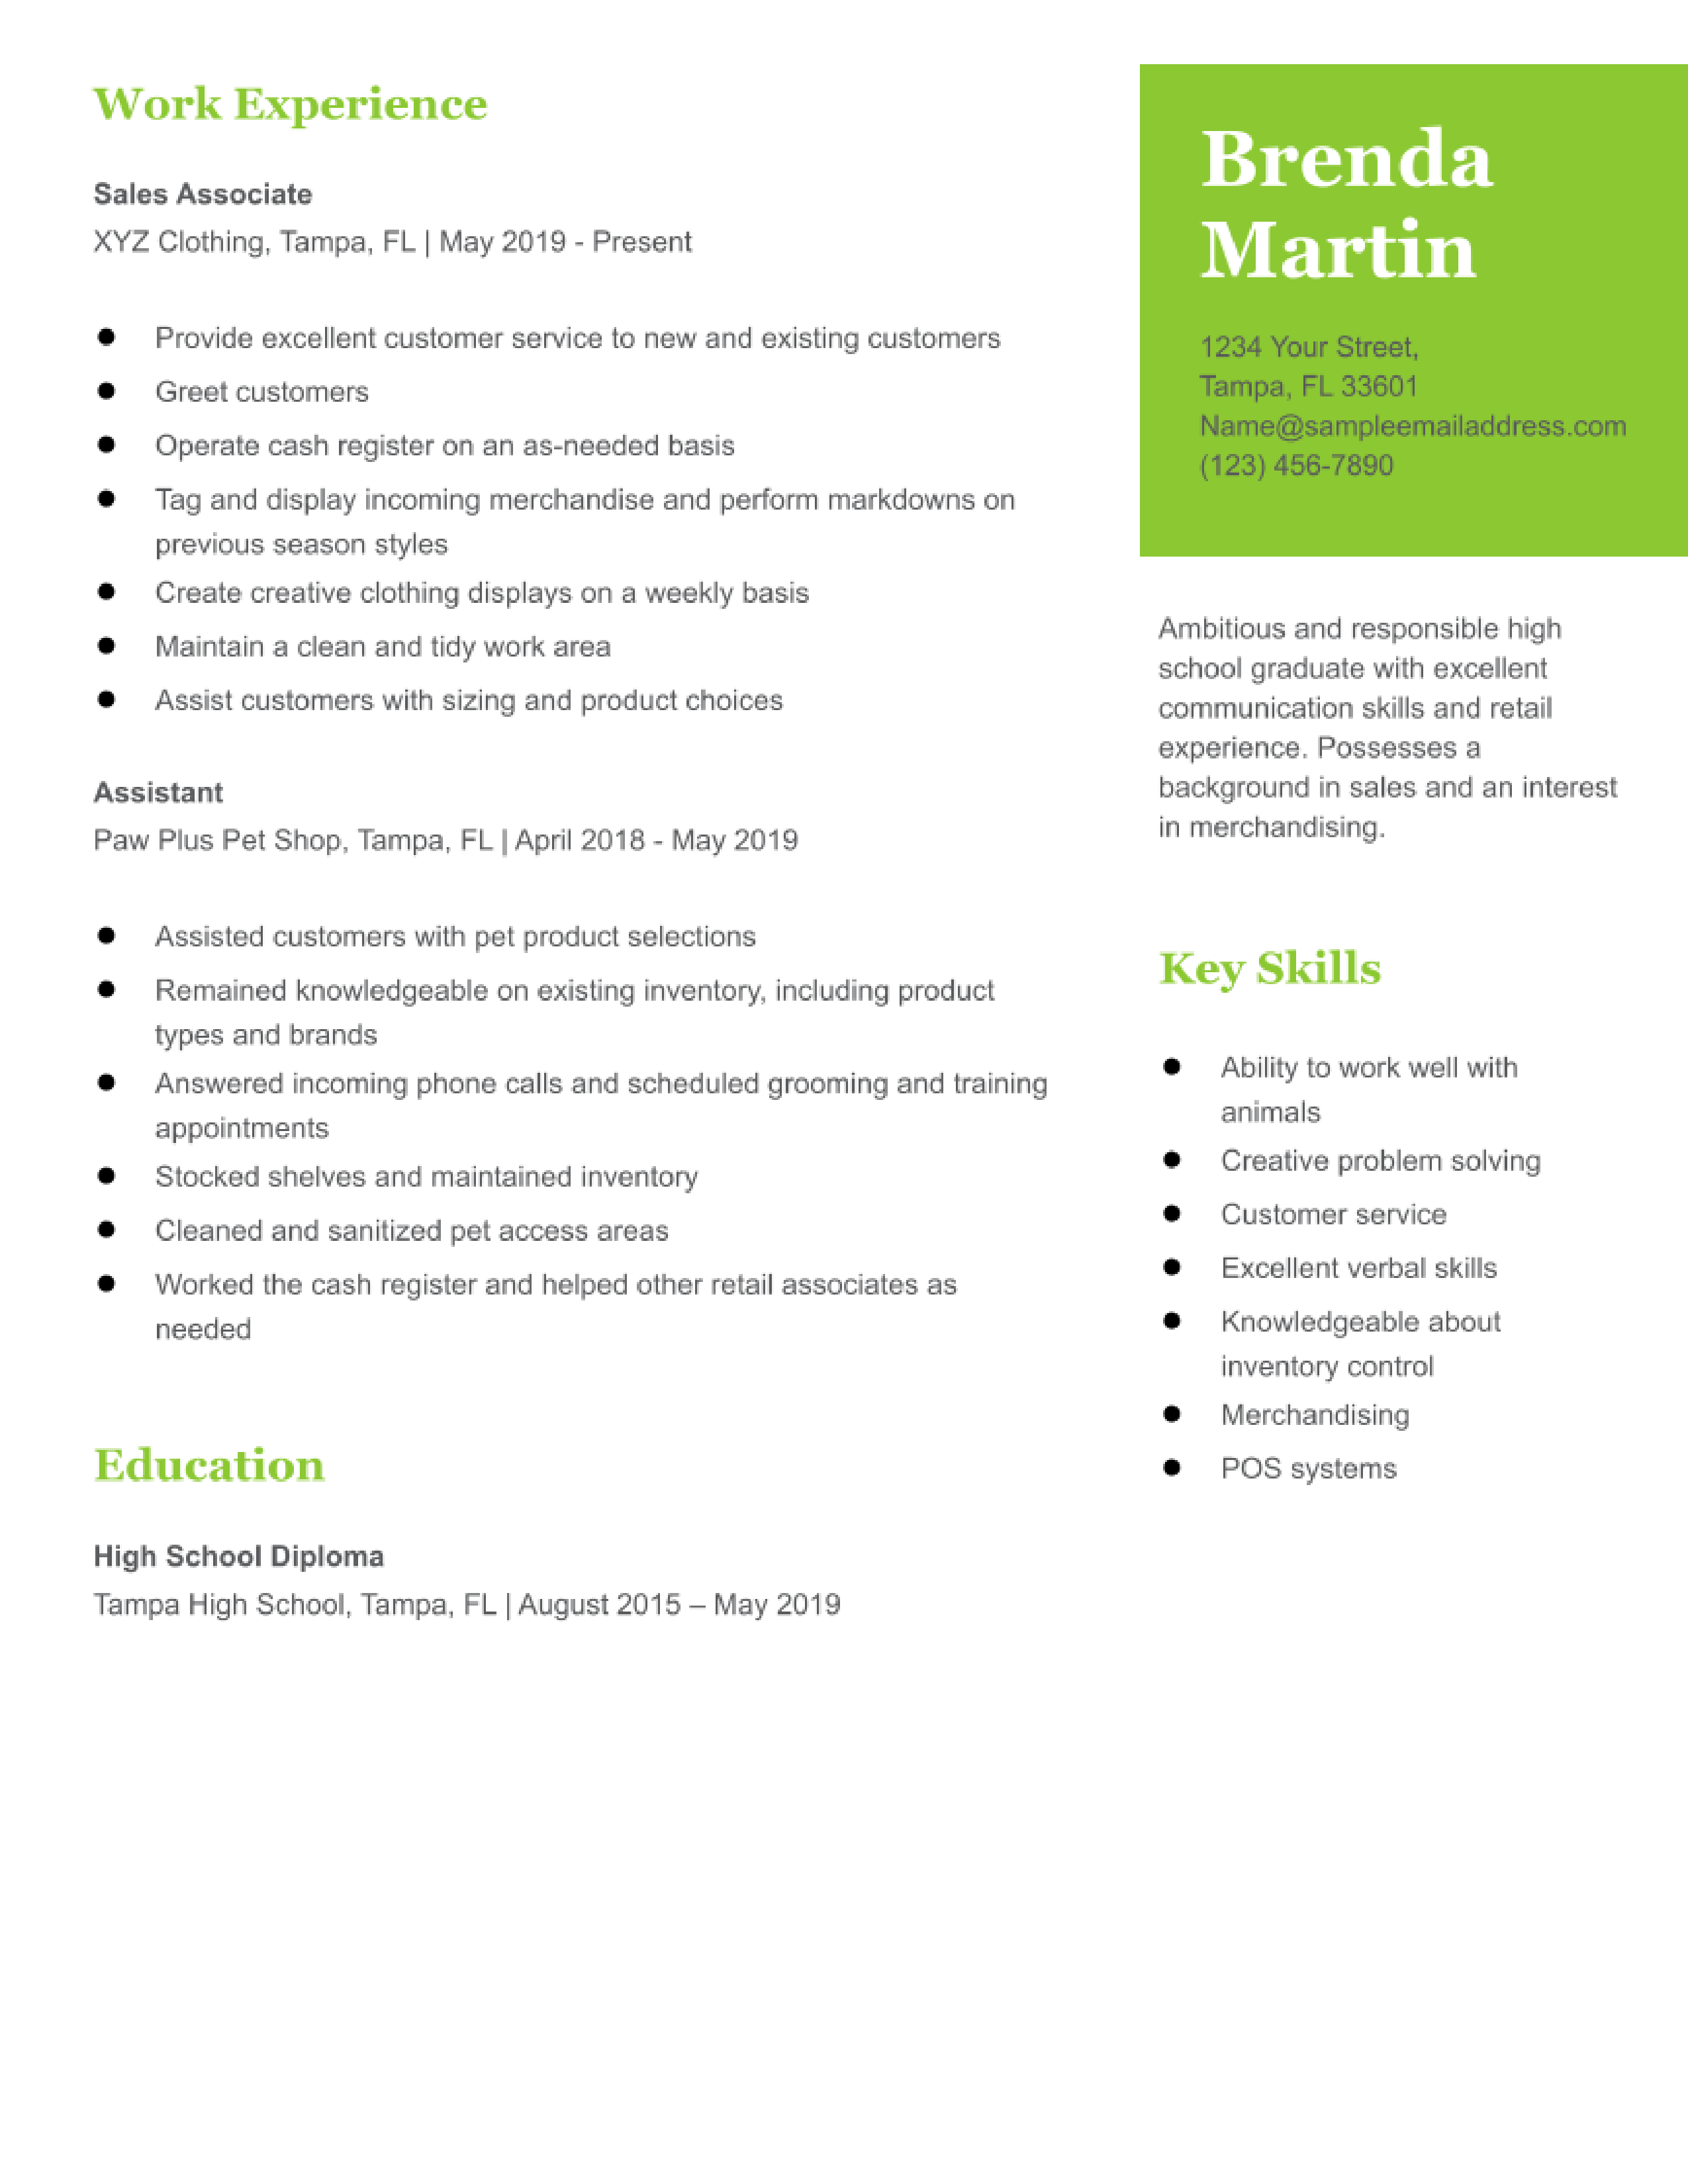 high-school-student-resume-template-for-college